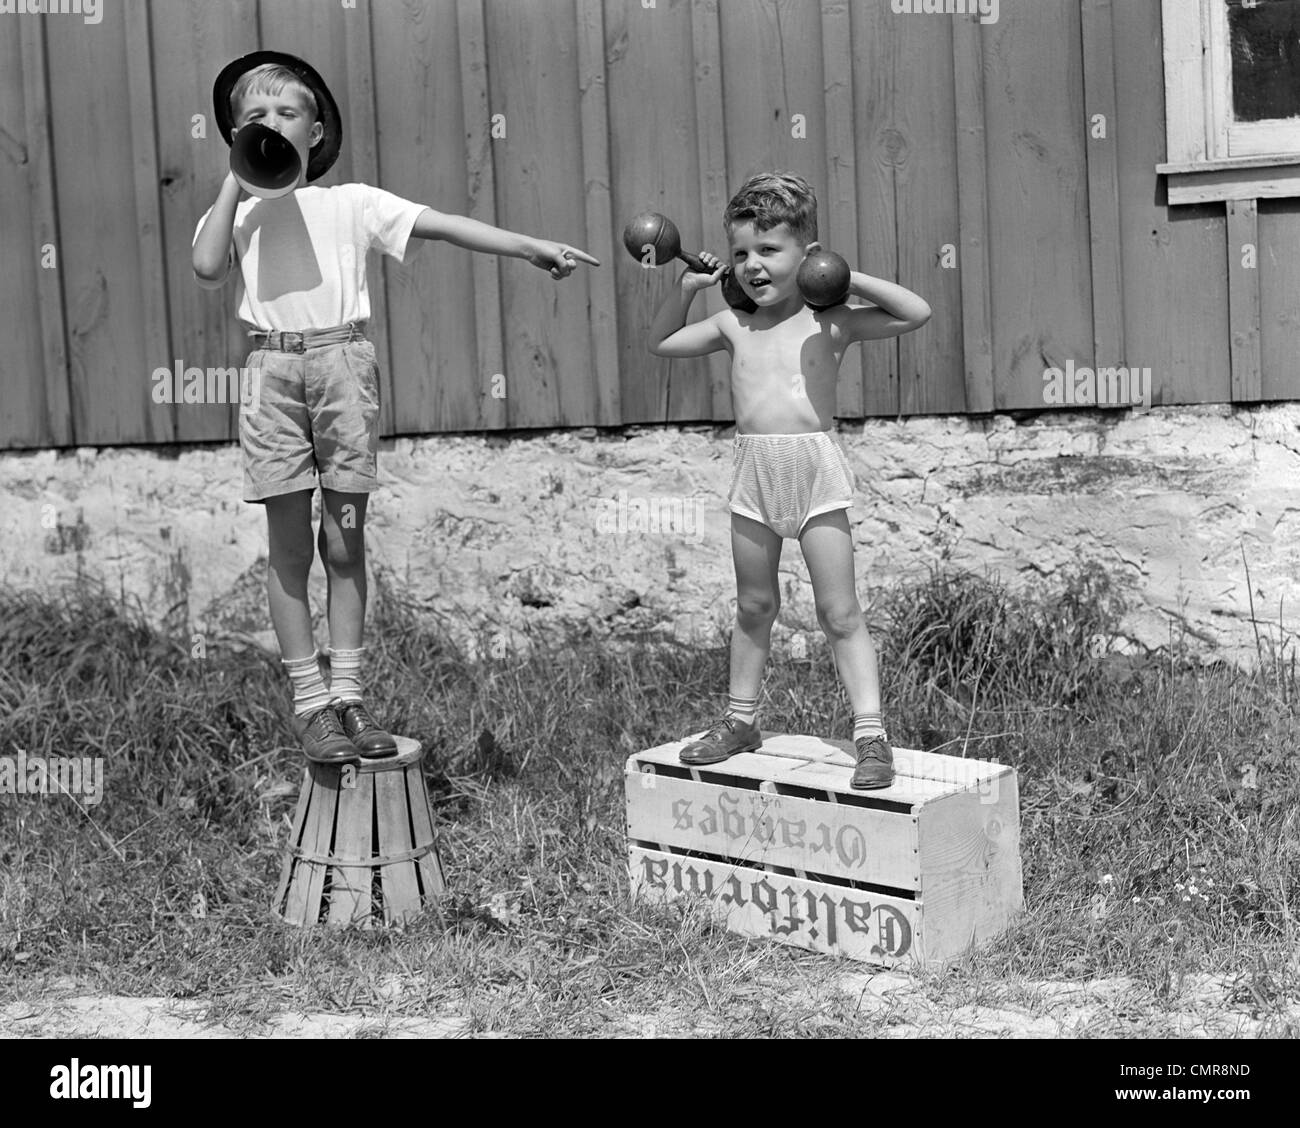 1930s 1940s BOYS PLAYING CARNIVAL STRONGMAN ONE LIFTING DUMBBELLS OTHER ANNOUNCING ACT THROUGH MEGAPHONE Stock Photo